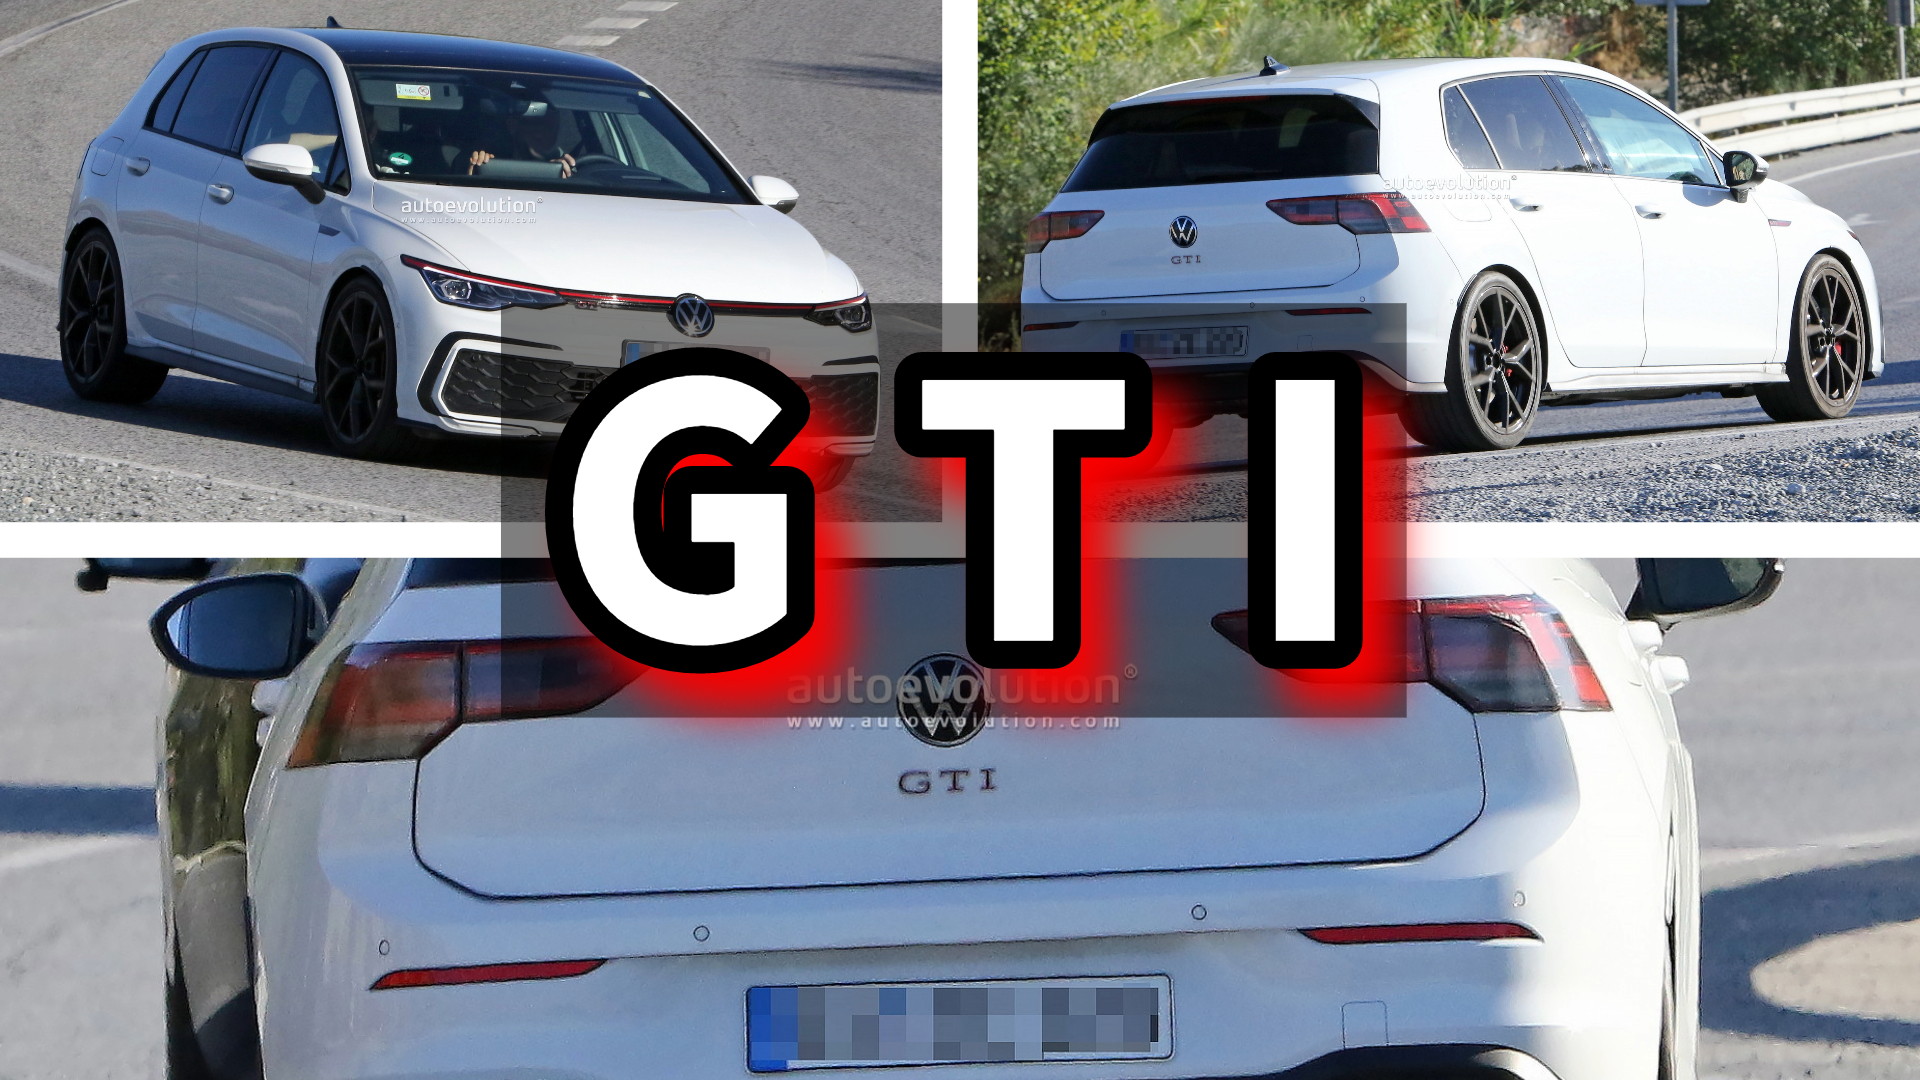 https://s1.cdn.autoevolution.com/images/news/2025-vw-golf-gti-caught-wearing-more-eyeliner-looks-ready-for-a-night-out-222204_1.jpg